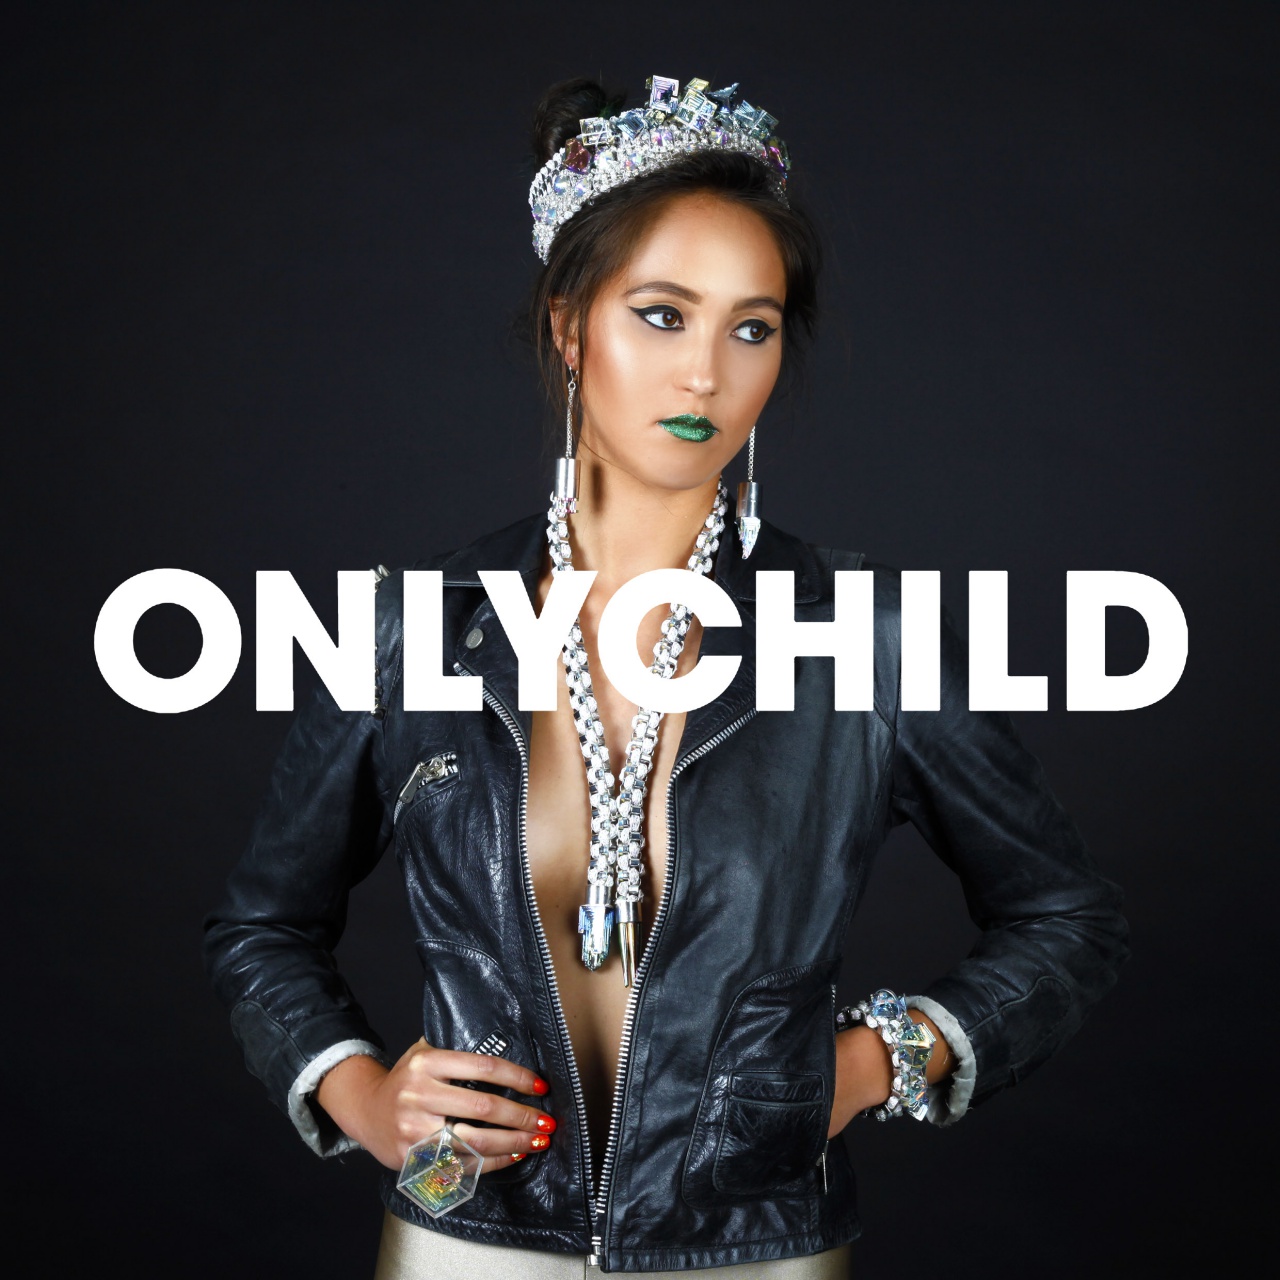 Only Child London